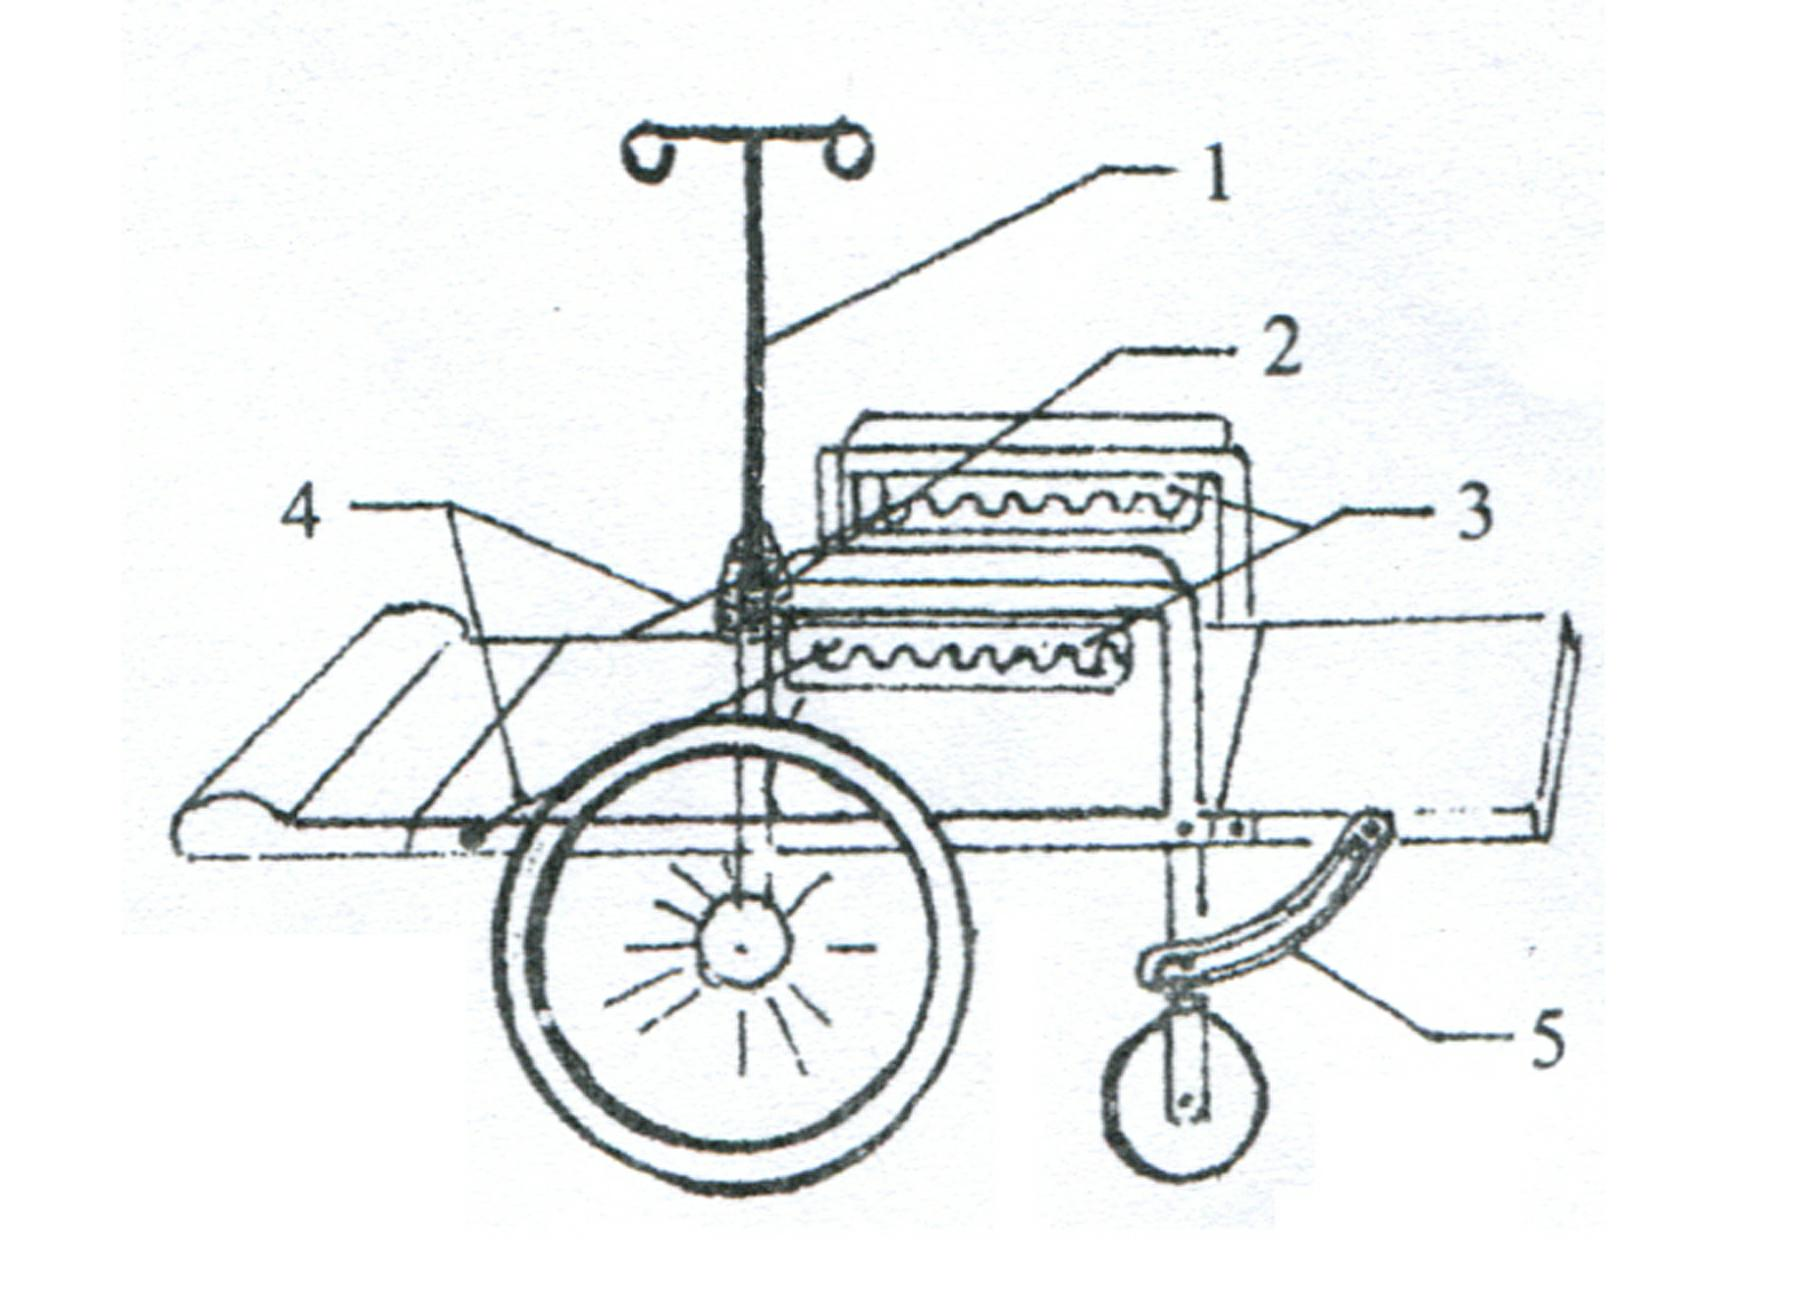 Wheelchair provided with transfusion frame and cane for walking and added with lying function